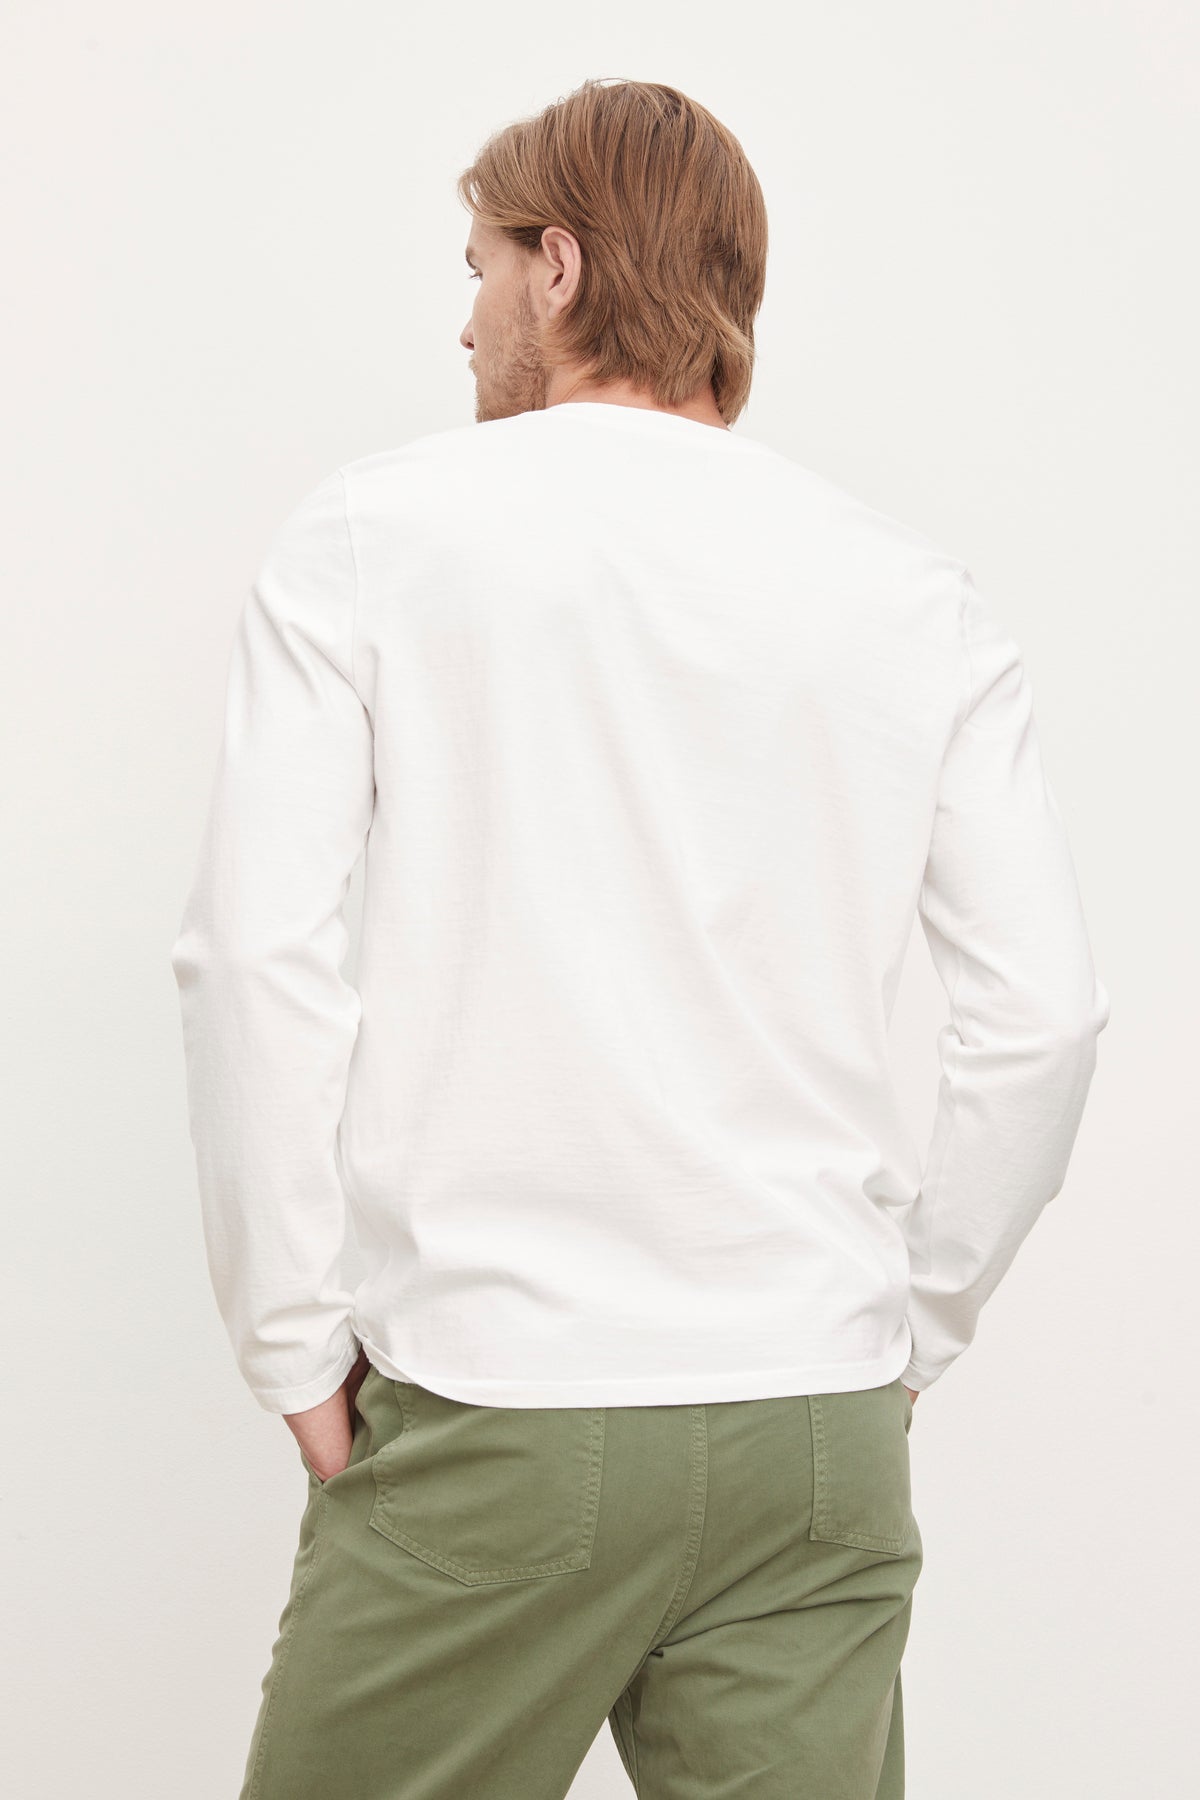 Man viewed from behind, wearing a white long-sleeve cotton jersey Holt Henley by Velvet by Graham & Spencer with a four-button placket and olive green pants, standing against a plain background.-36009940385985